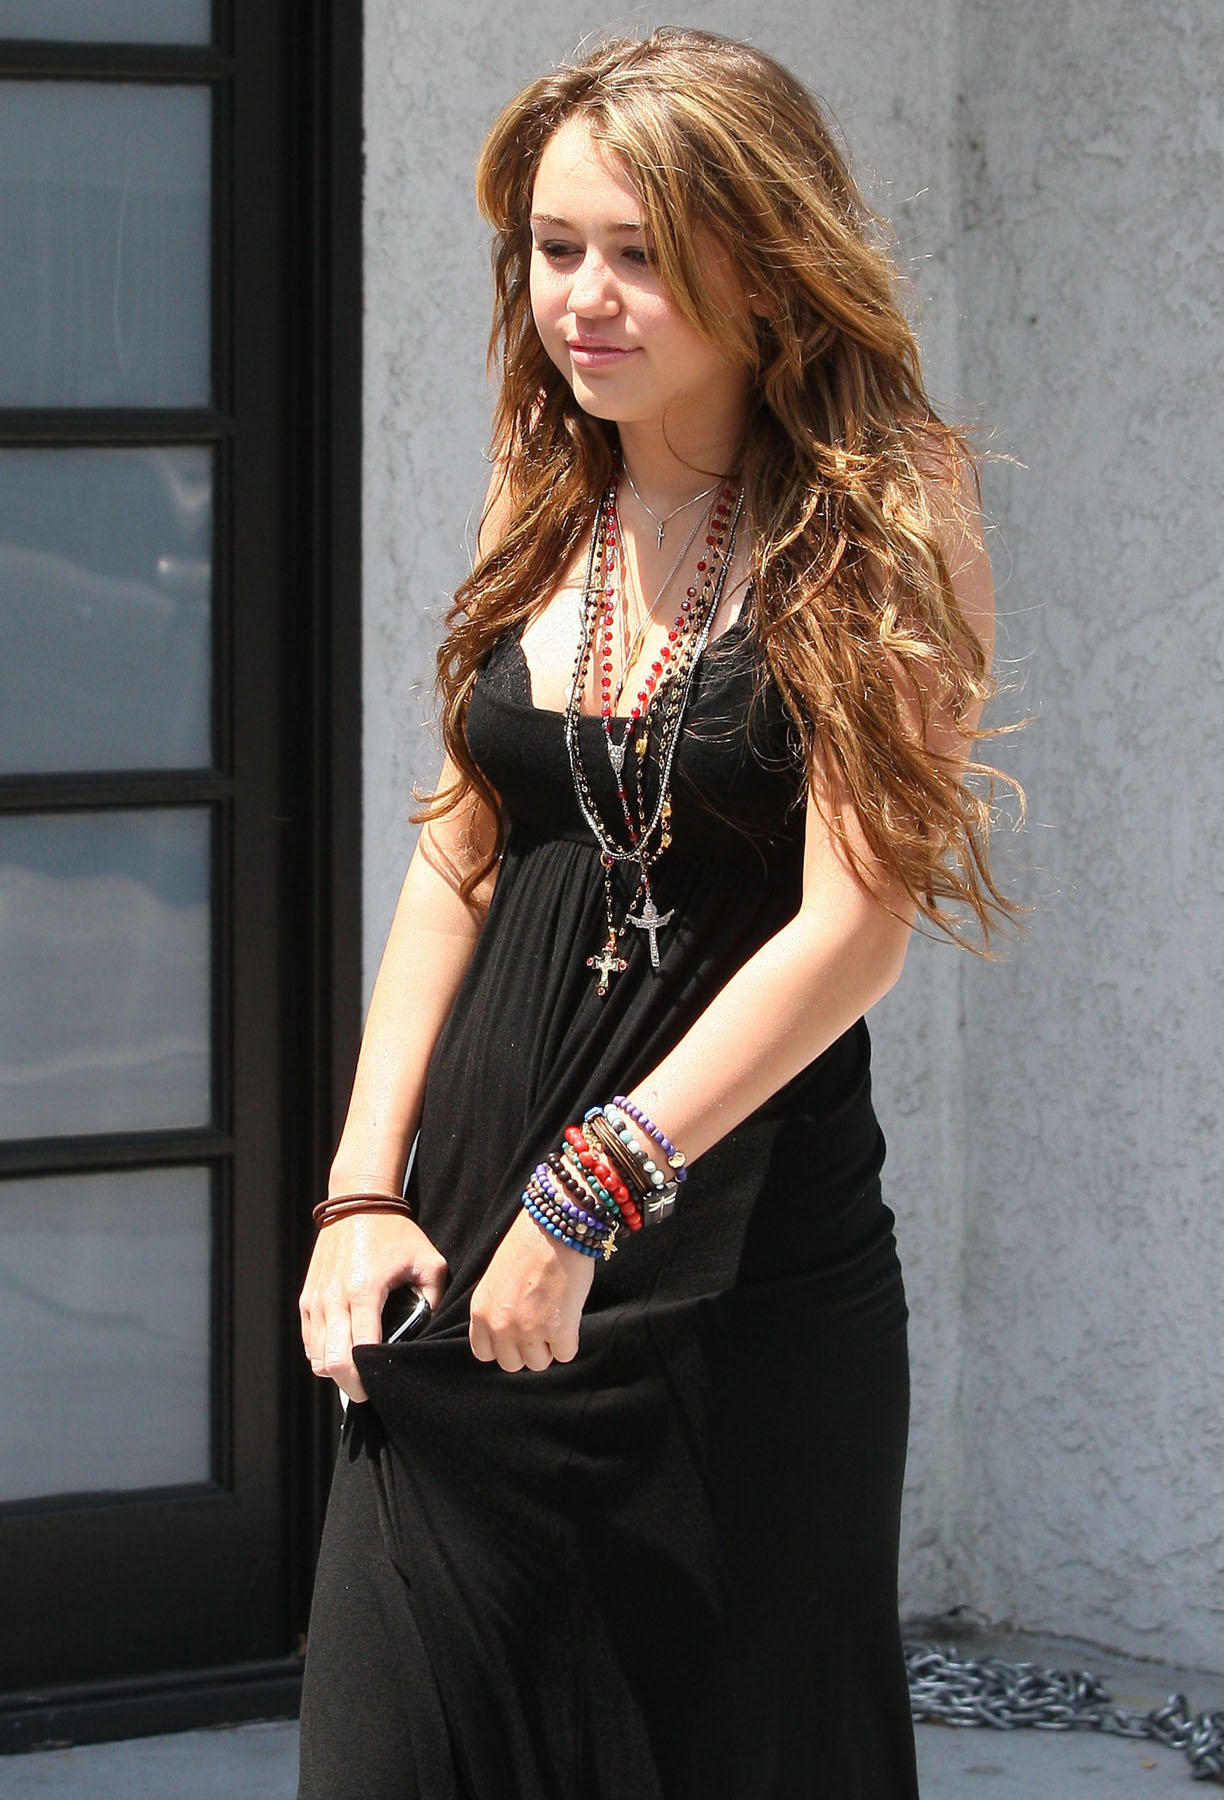 Miley-Cyrus-20090831_Out-n-About-Studio-City_May09_08562.jpg